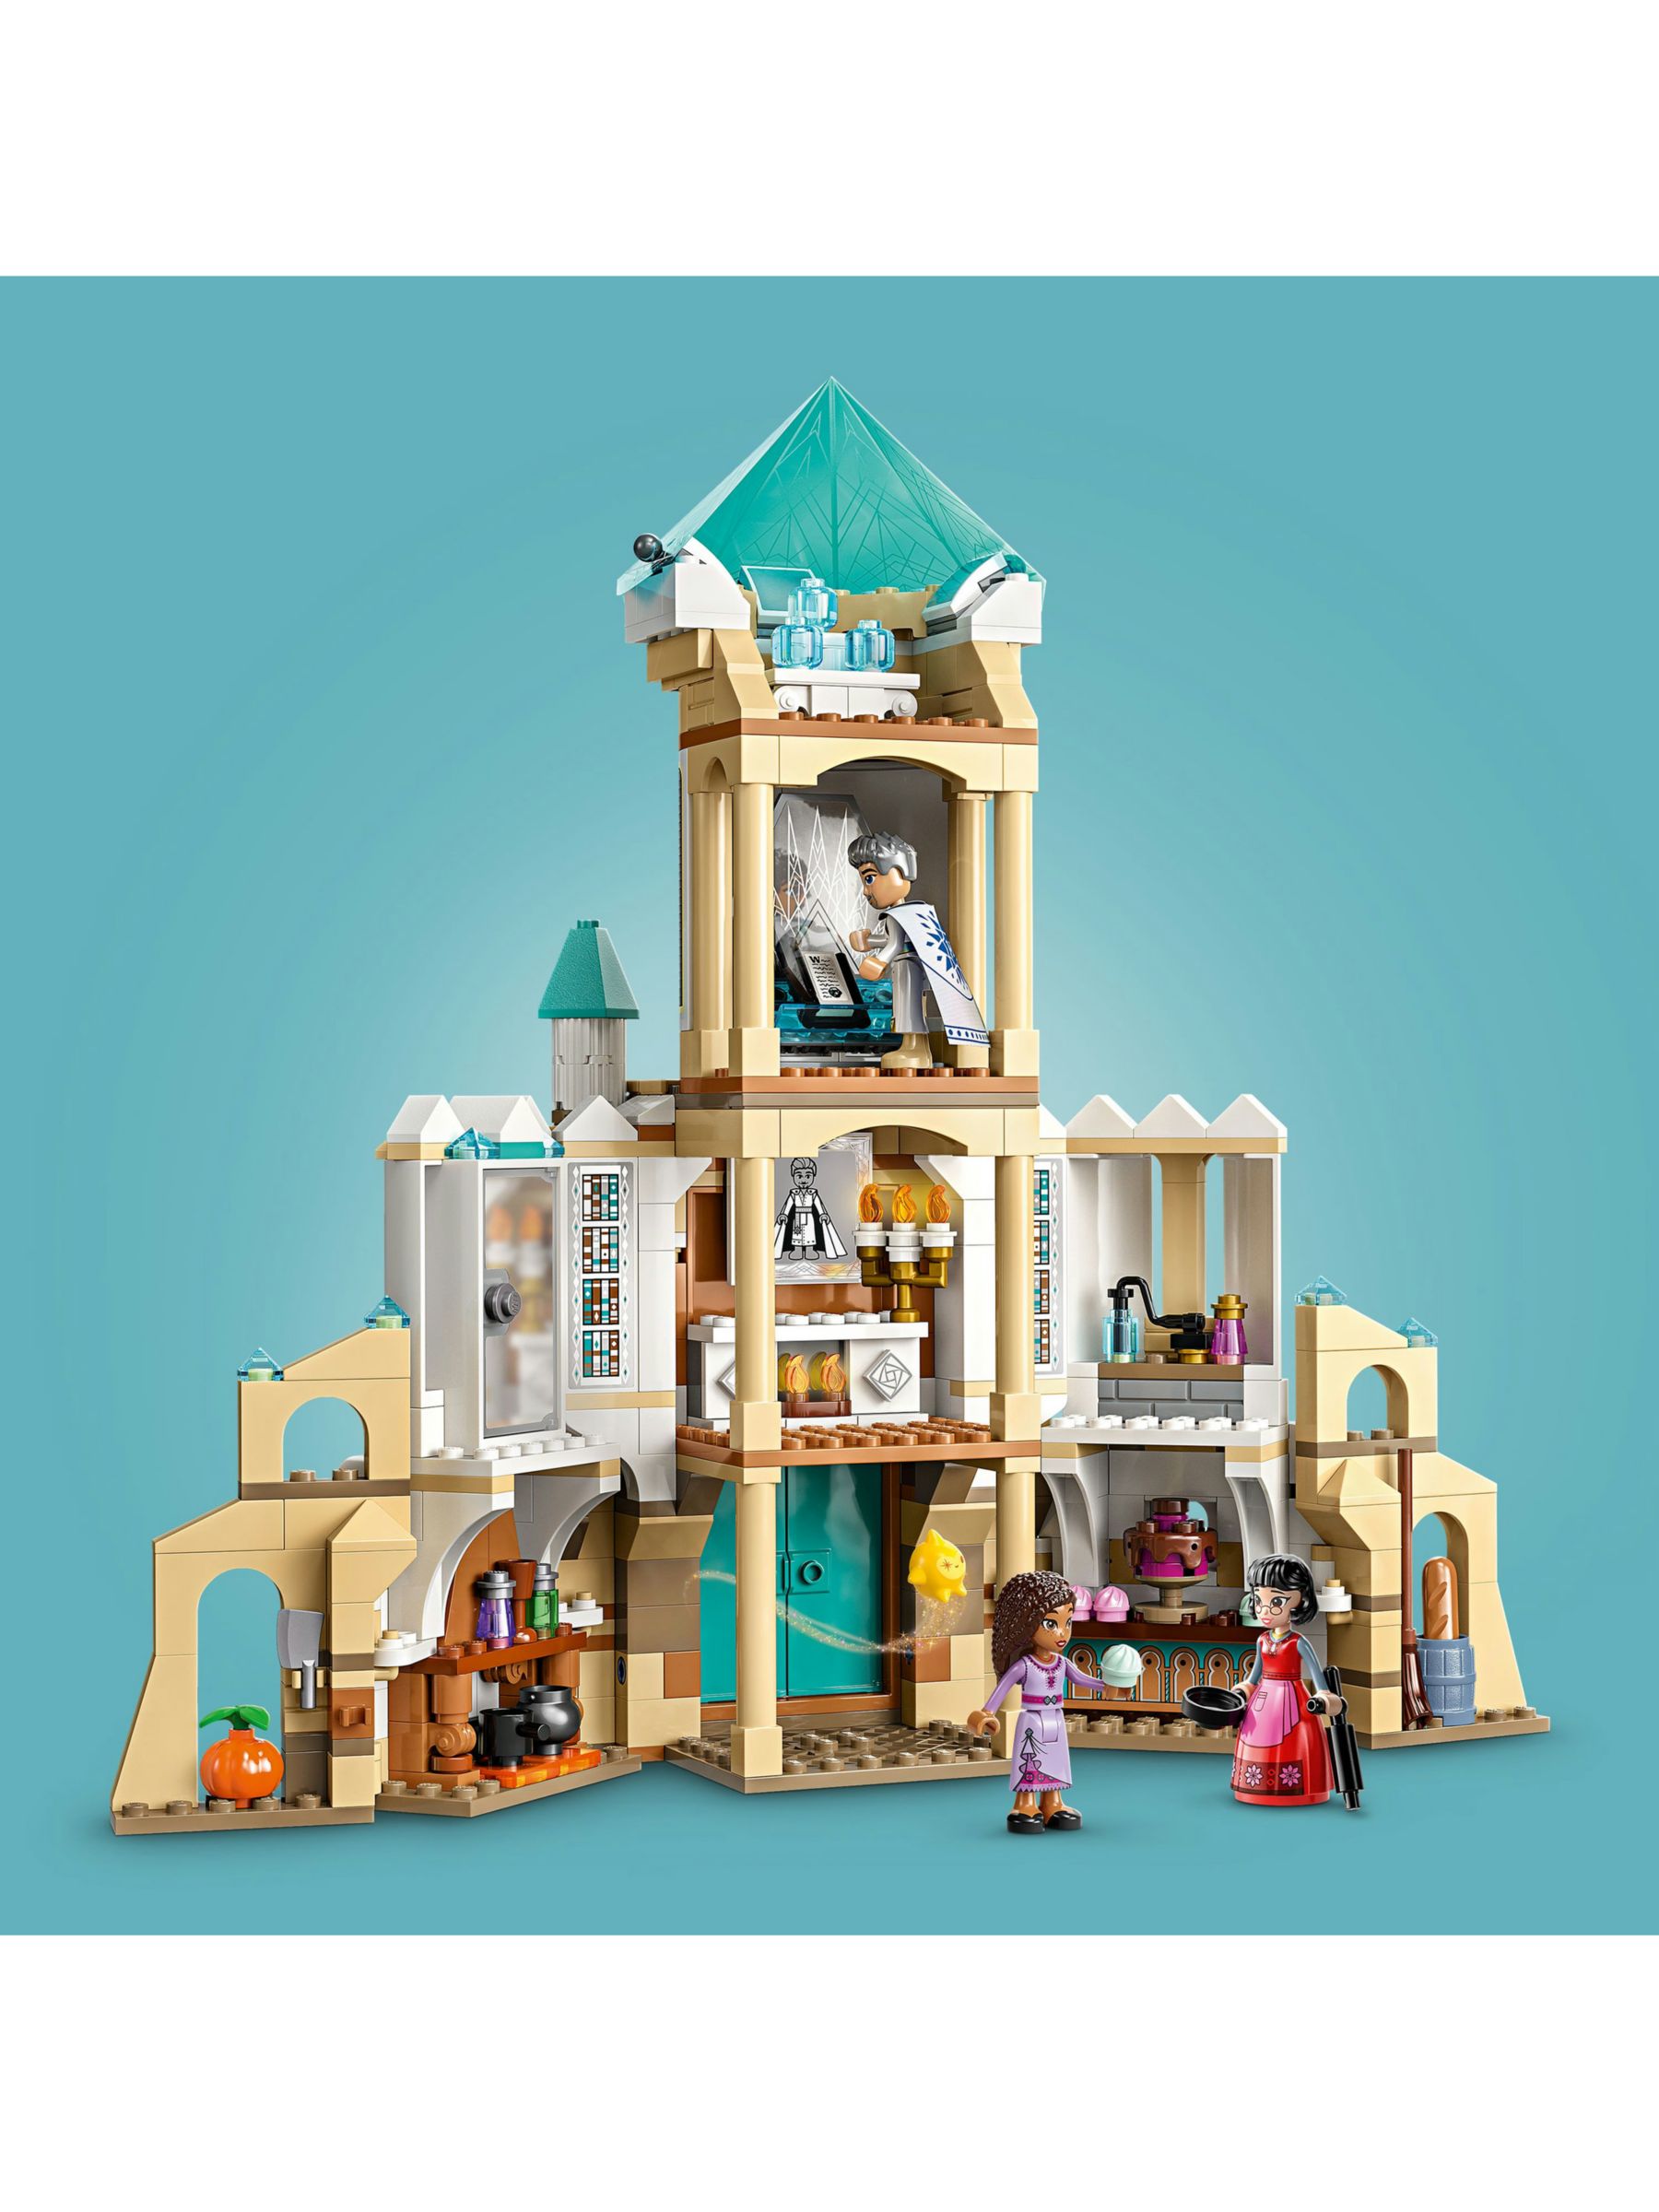 King Magnifico's Castle 43224 | Disney™ | Buy online at the Official LEGO®  Shop US